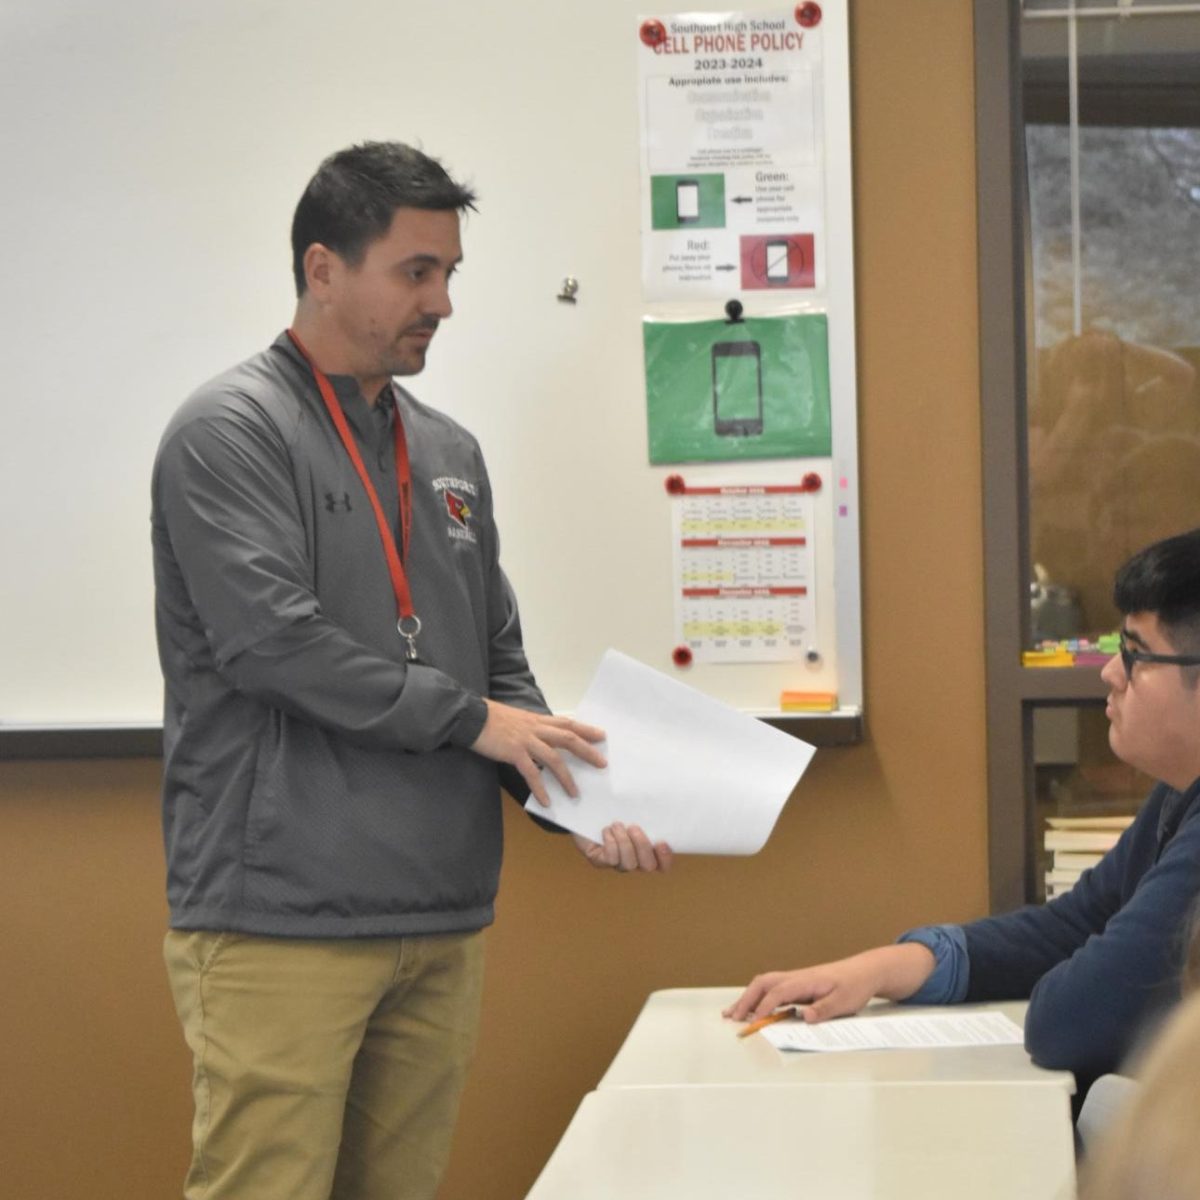 English teacher Brent Bockelman helps students prepare for finals on Dec. 18. Bockelman is one of the master teachers whose paychecks will benefit from the grant.